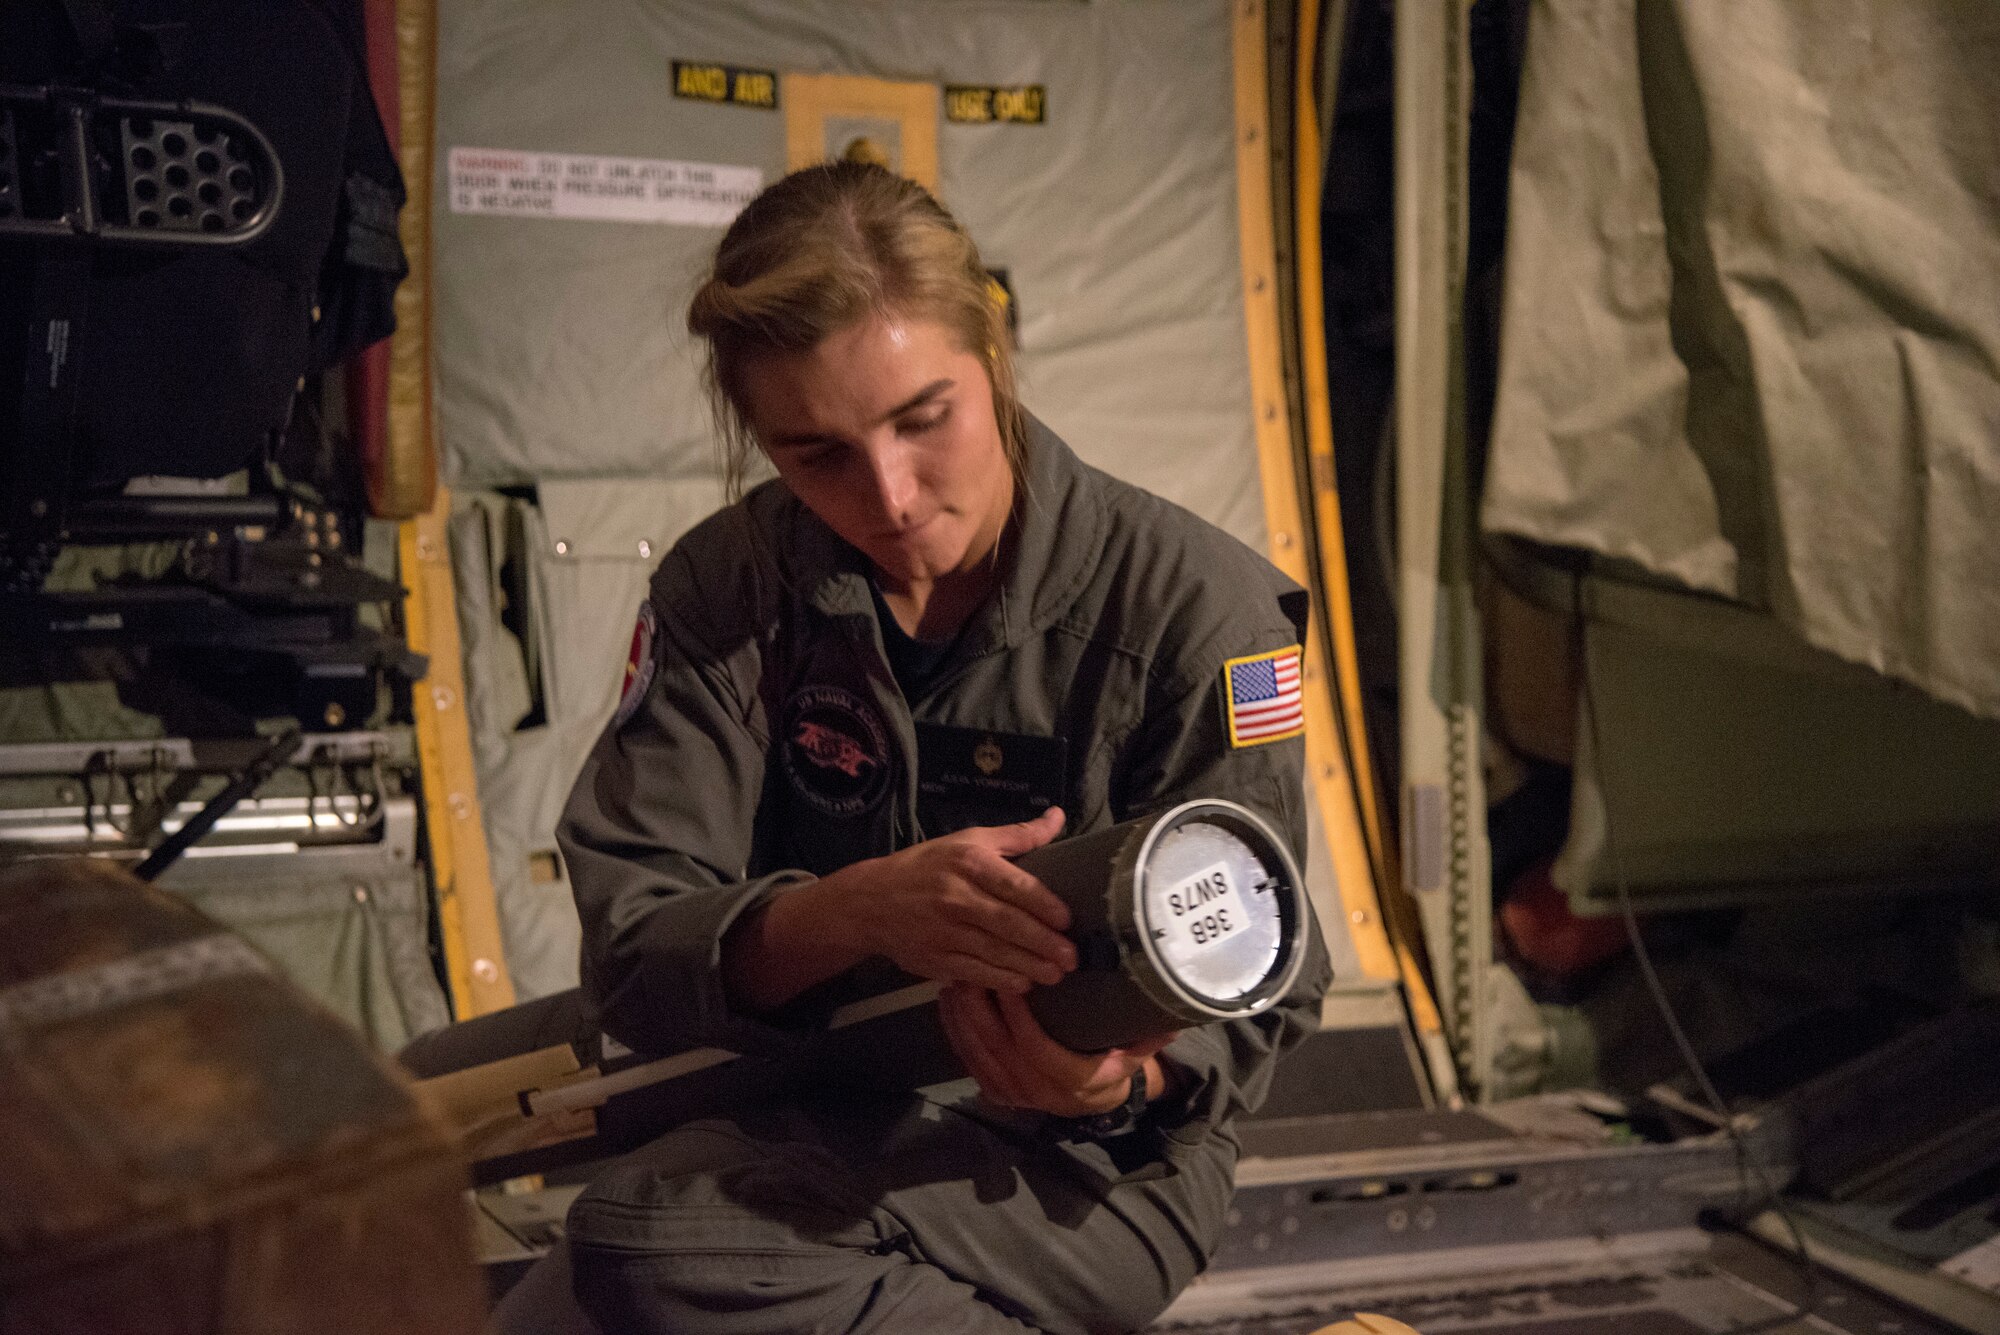 U.S. Naval Academy Midshipman First Class Julia Von Fecht, Training and Research in Oceanic and Atmospheric Processes in Tropical Cyclones Program team member, prepares a Navy Airborne Expendable Bathythermographs for deployment from a WC-130J Super Hercules during a Hurricane Hunter mission into Hurricane Dorian Aug. 31, 2019 over the Atlantic Ocean.